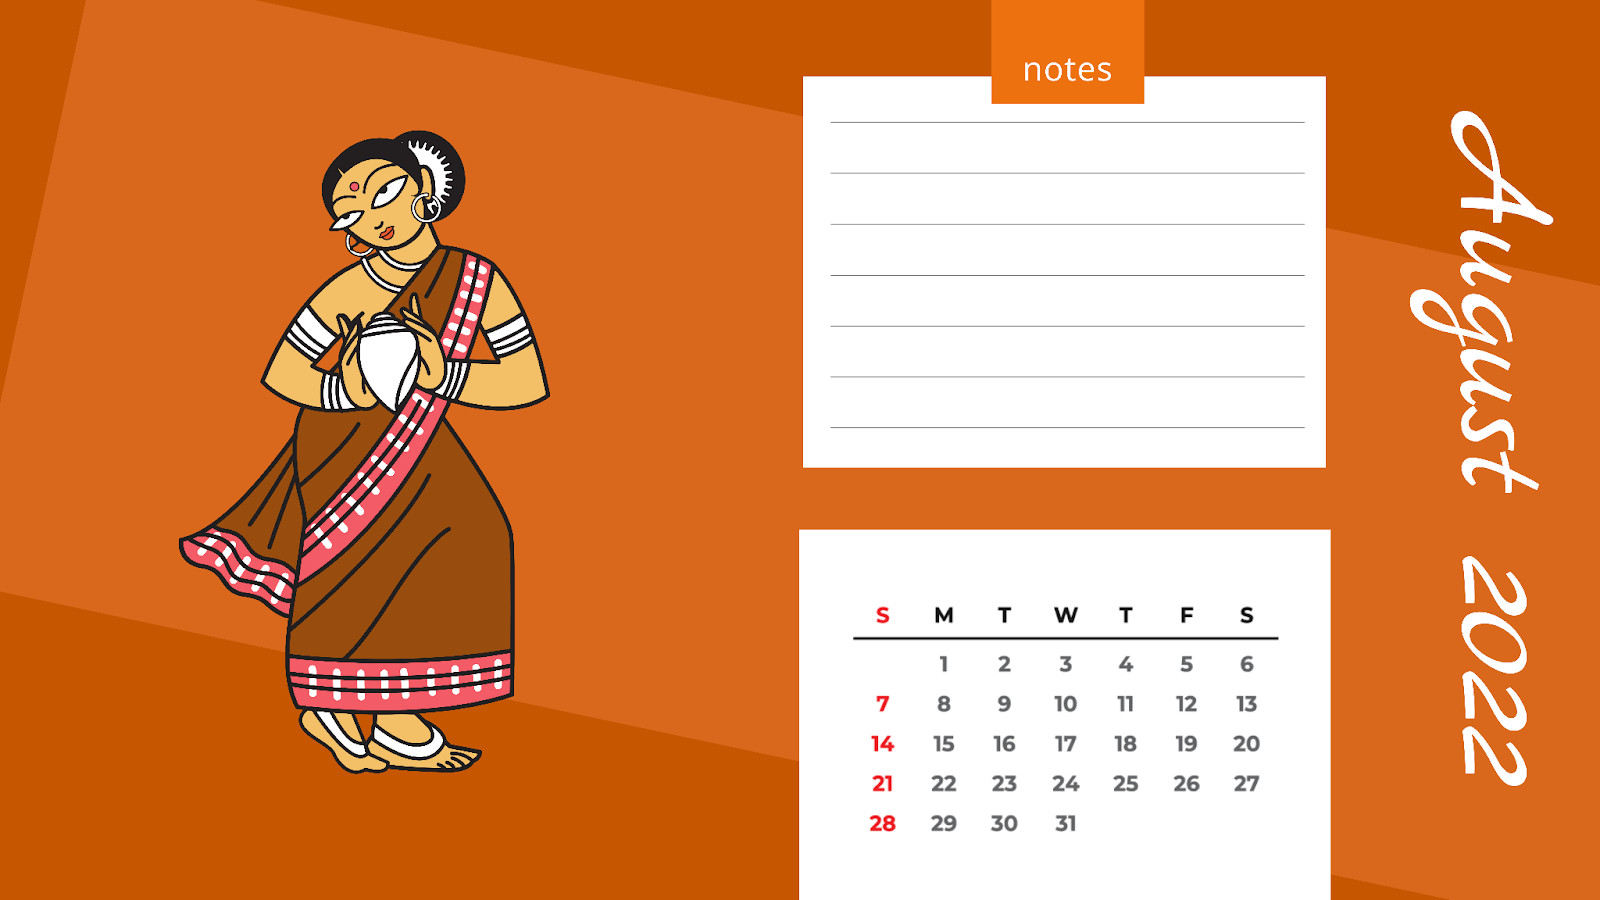 Customized Calendar August month with DrawHipo's Art of Bengal Illustrations  